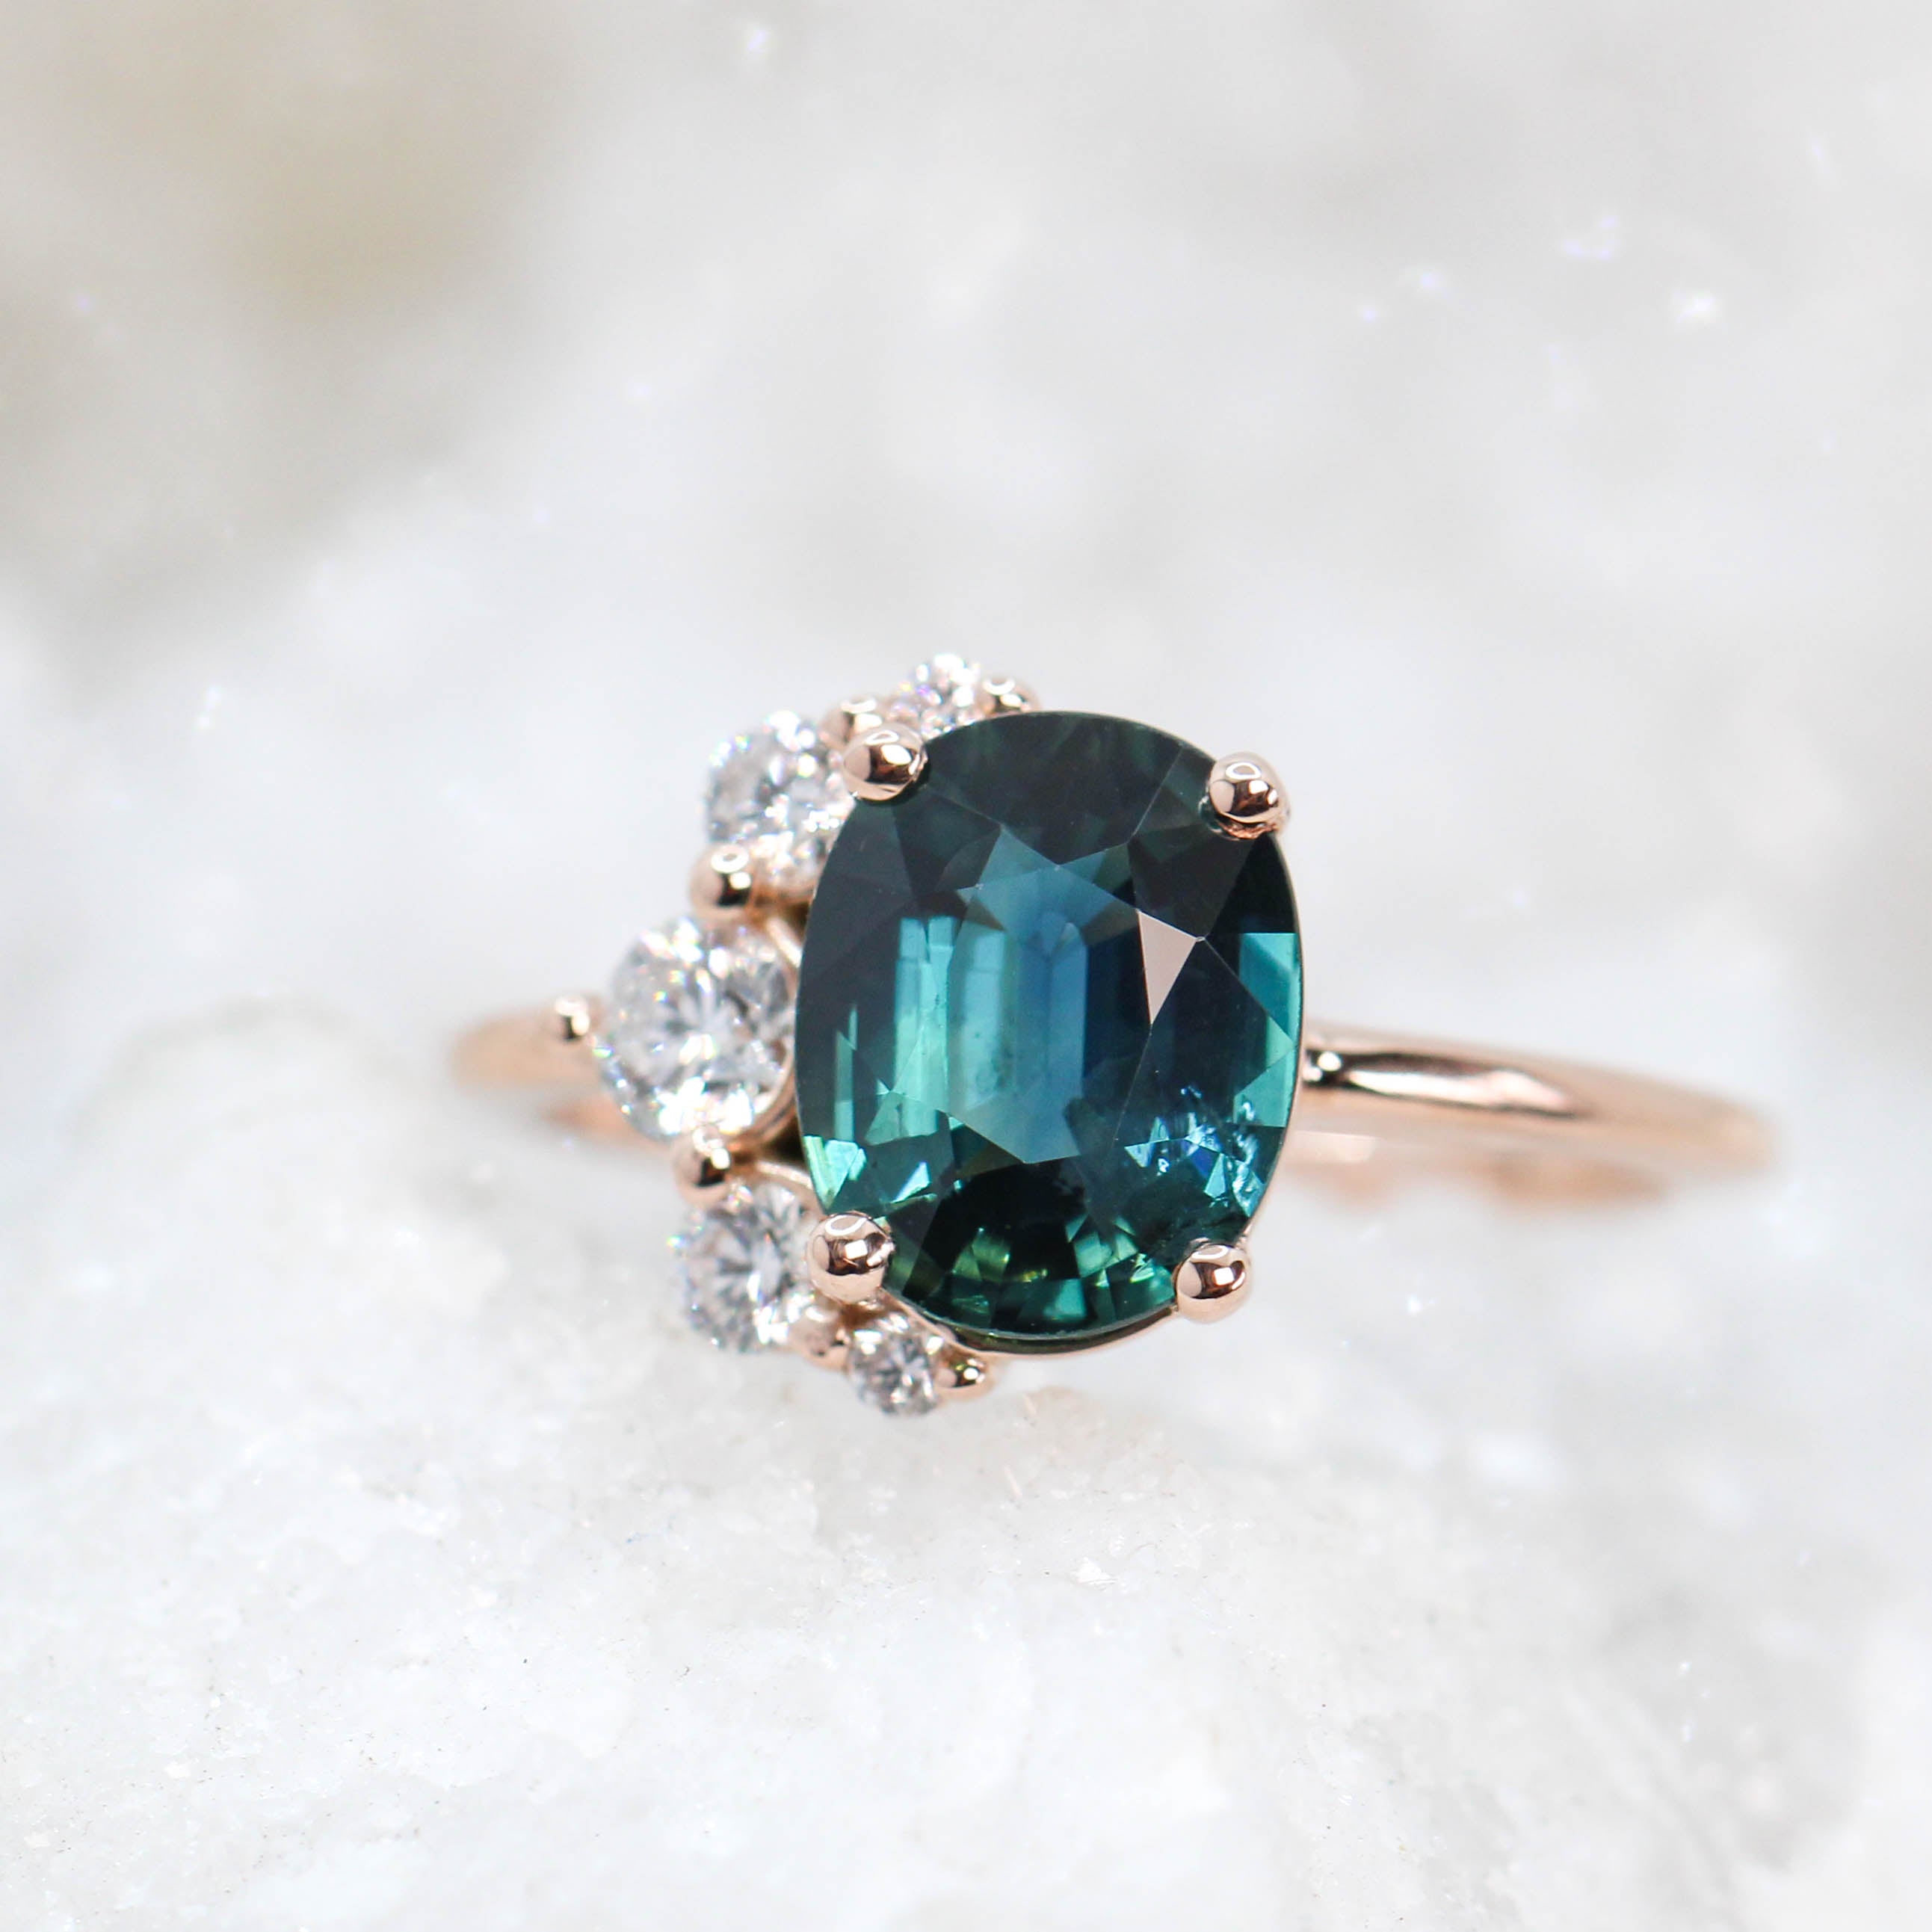 Carell Ring with a 2.01 Carat Teal Oval Sapphire and White Accent Diamonds in 14k Rose Gold - Ready to Size and Ship - Midwinter Co. Alternative Bridal Rings and Modern Fine Jewelry